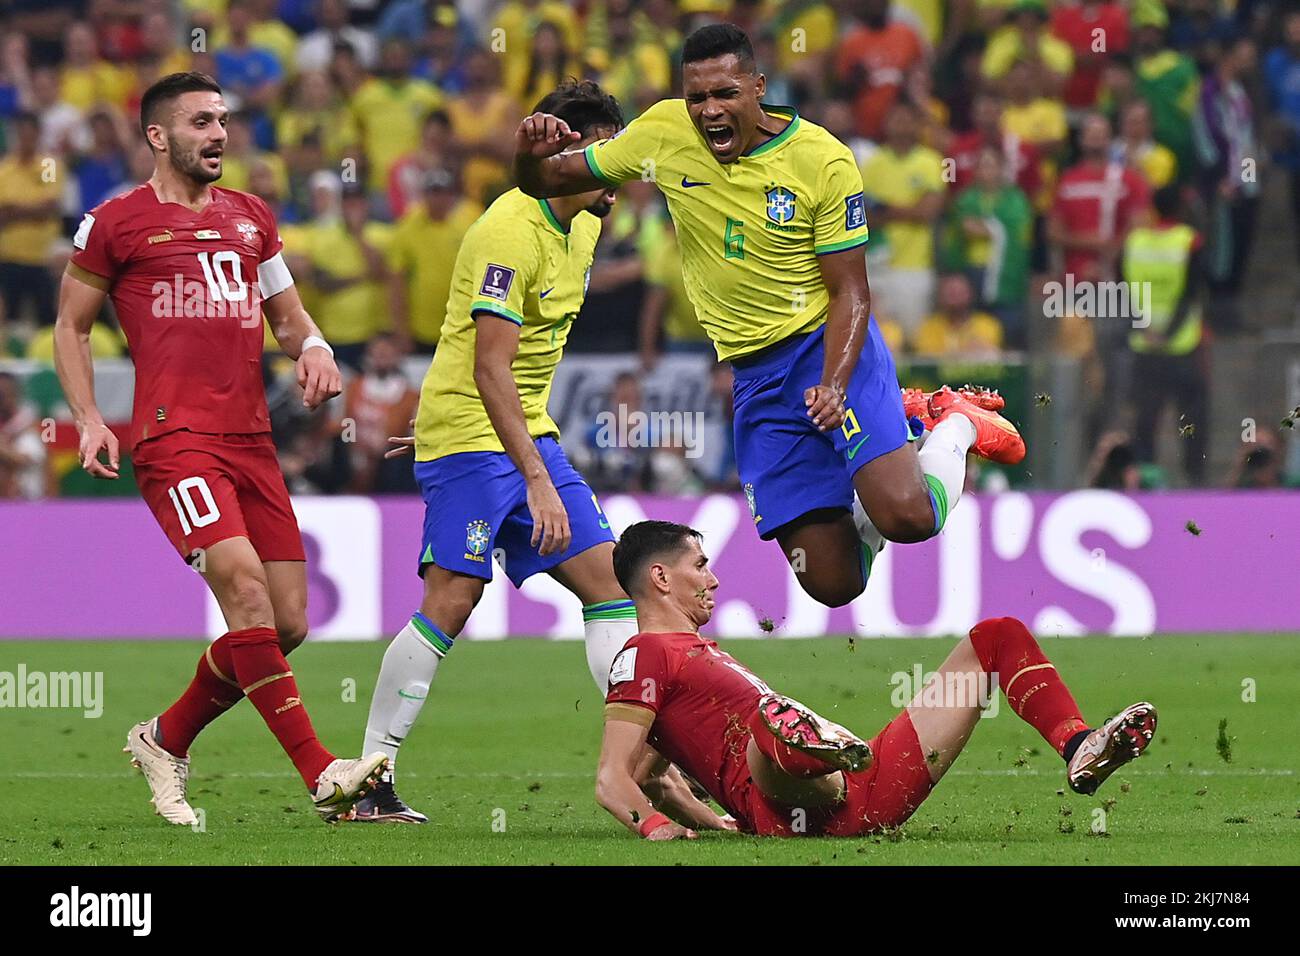 Lusail, Qatar. 24th Nov, 2022. Alex Sandro (R) of Brazil competes with Sasa Lukic (Bottom) of Serbia during the Group G match between Brazil and Serbia at the 2022 FIFA World Cup at Lusail Stadium in Lusail, Qatar, Nov. 24, 2022. Credit: Chen Cheng/Xinhua/Alamy Live News Stock Photo